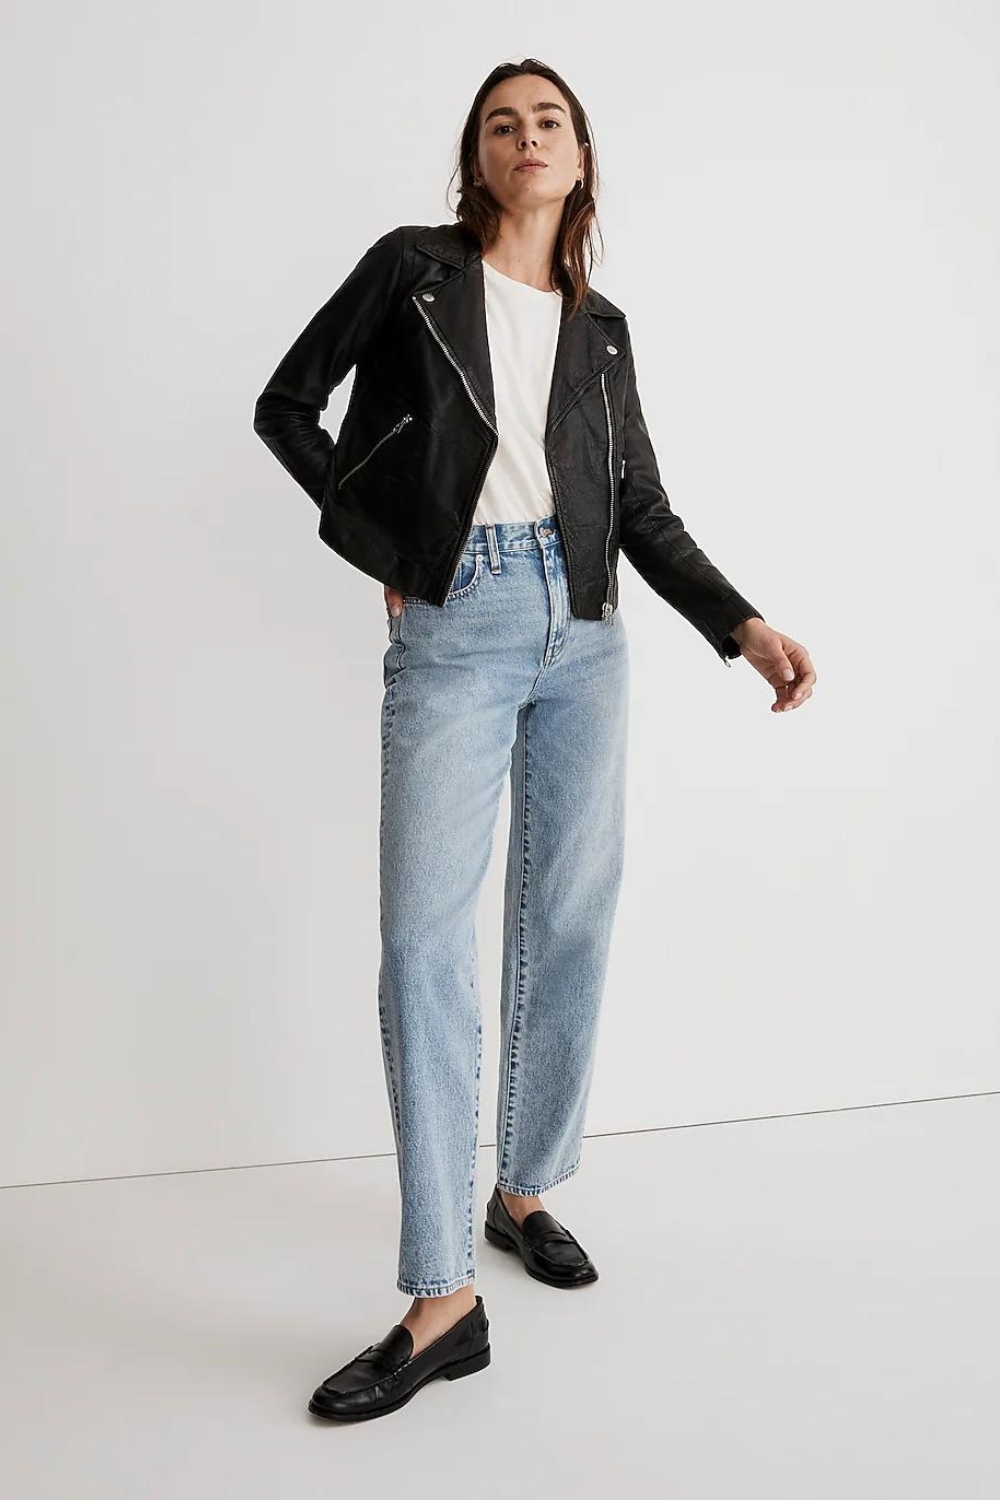 Black Leather jacket outfit with straight leg jeans and loafers